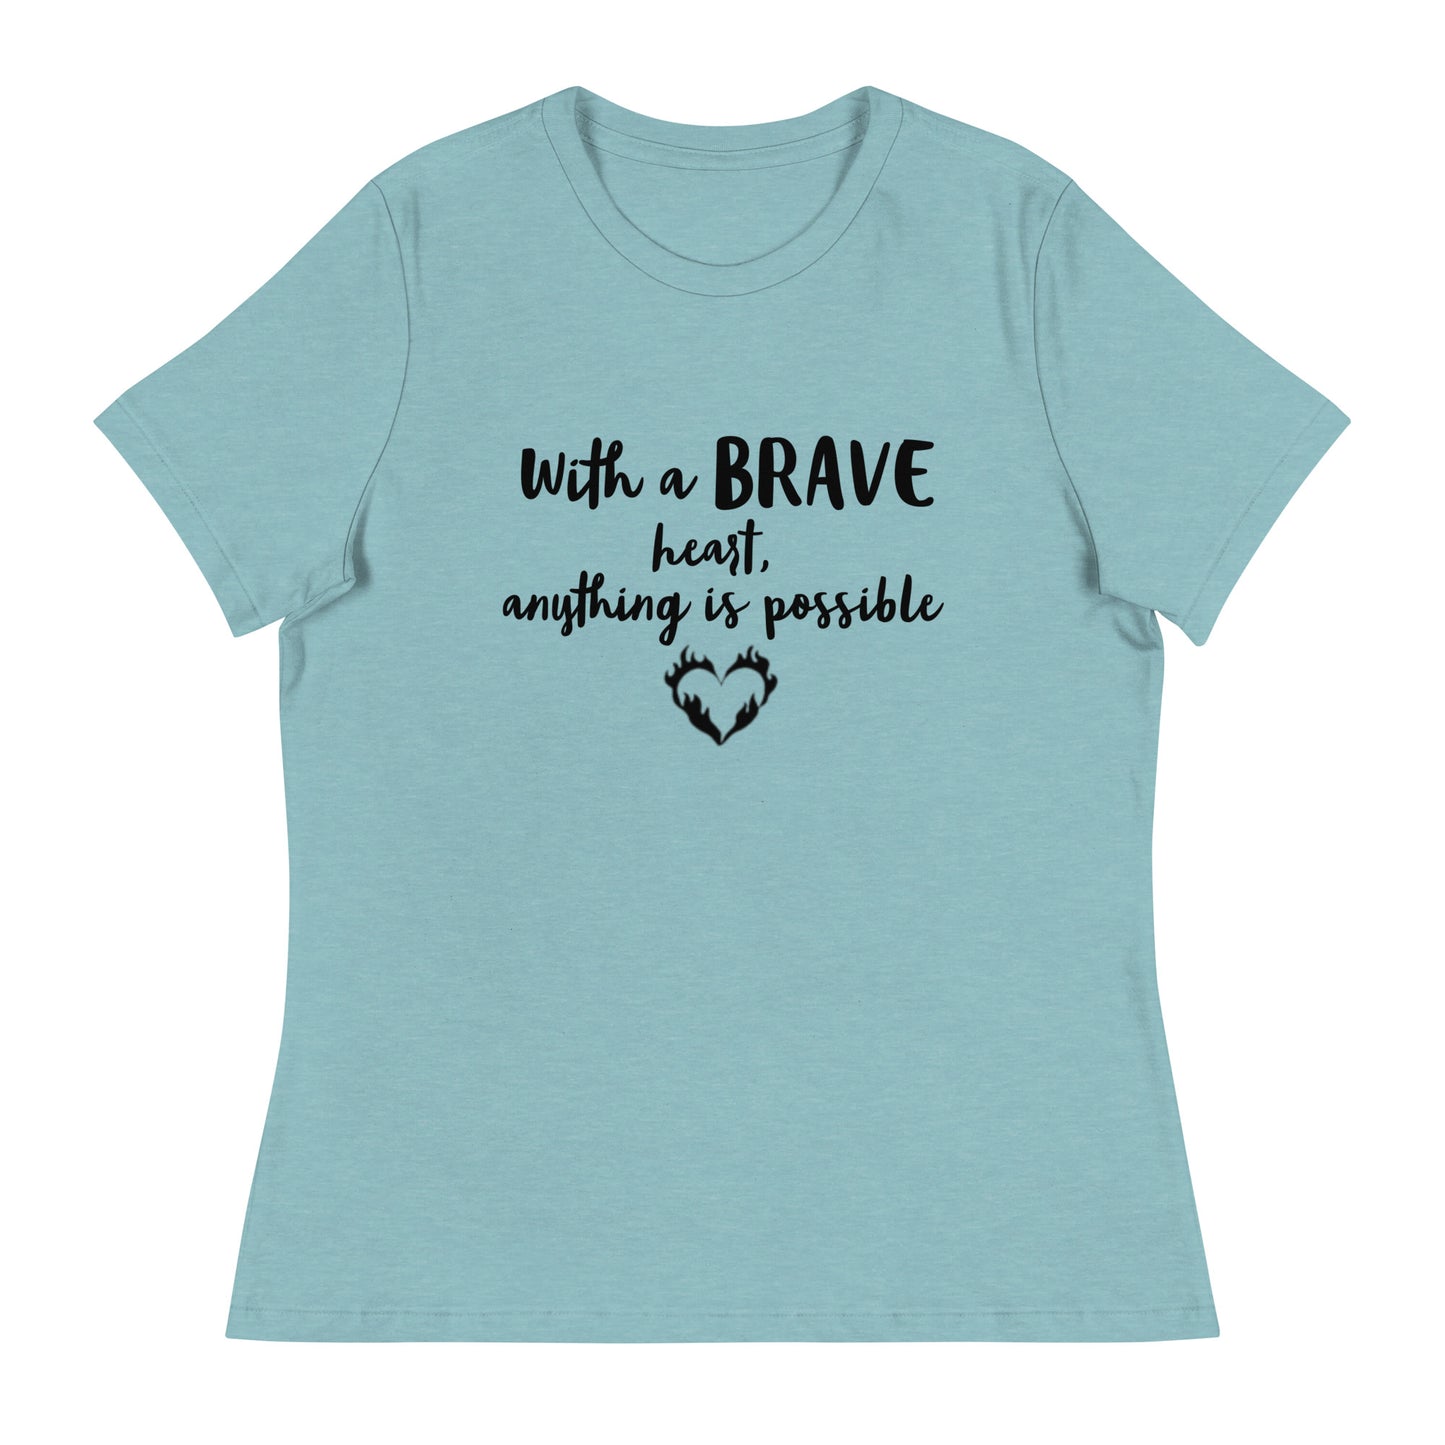 With a Brave Heart anything is possible women's tee